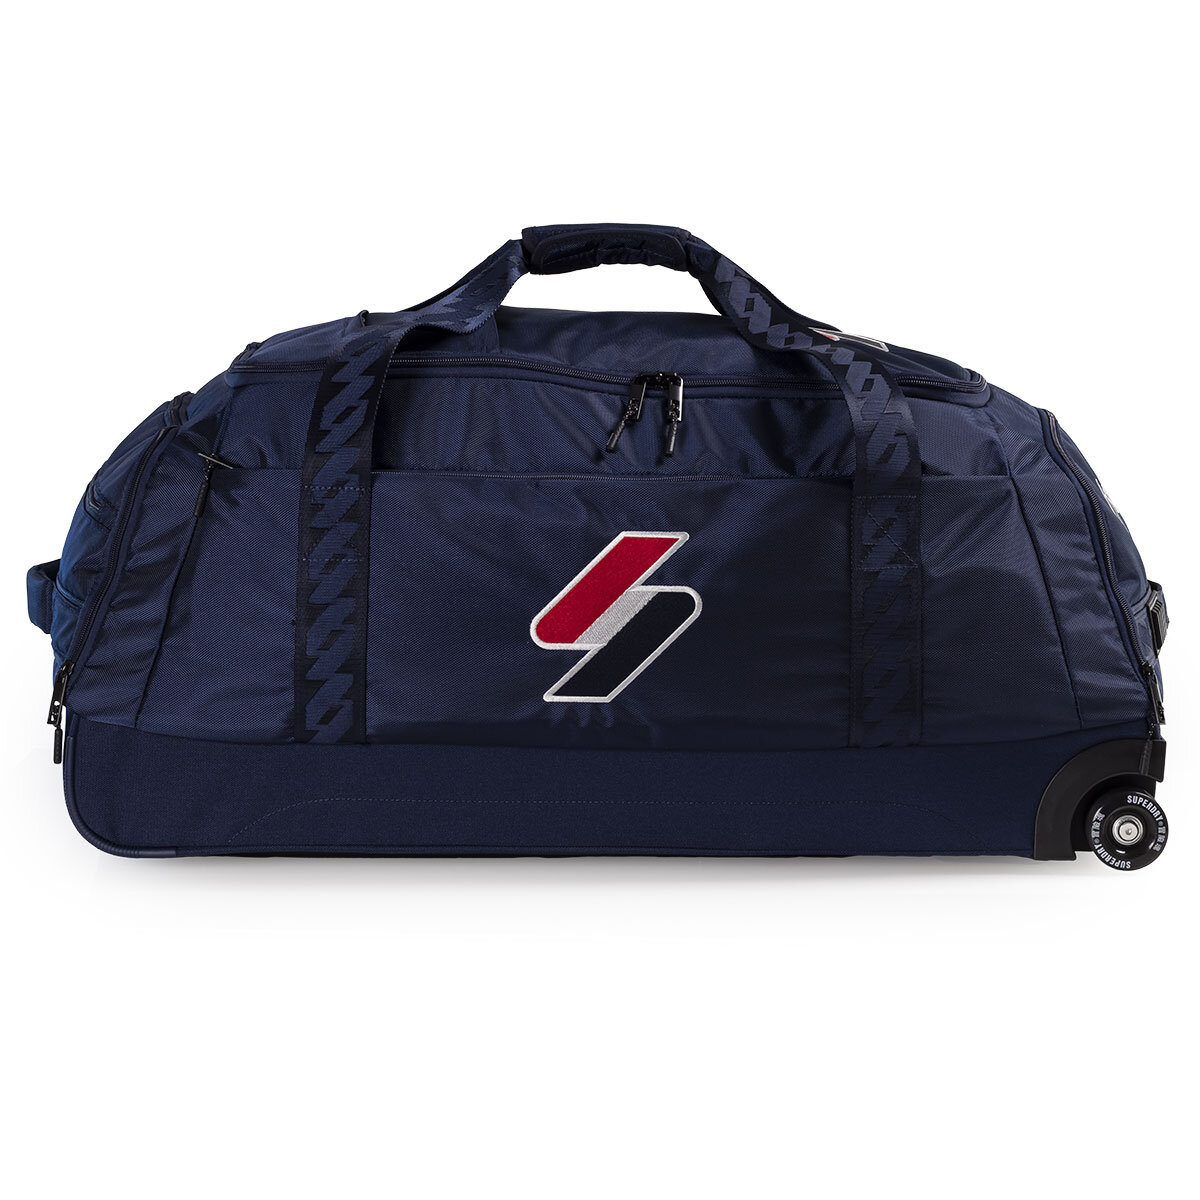 Superdry 30" (77cm) Wheeled Holdall in Navy